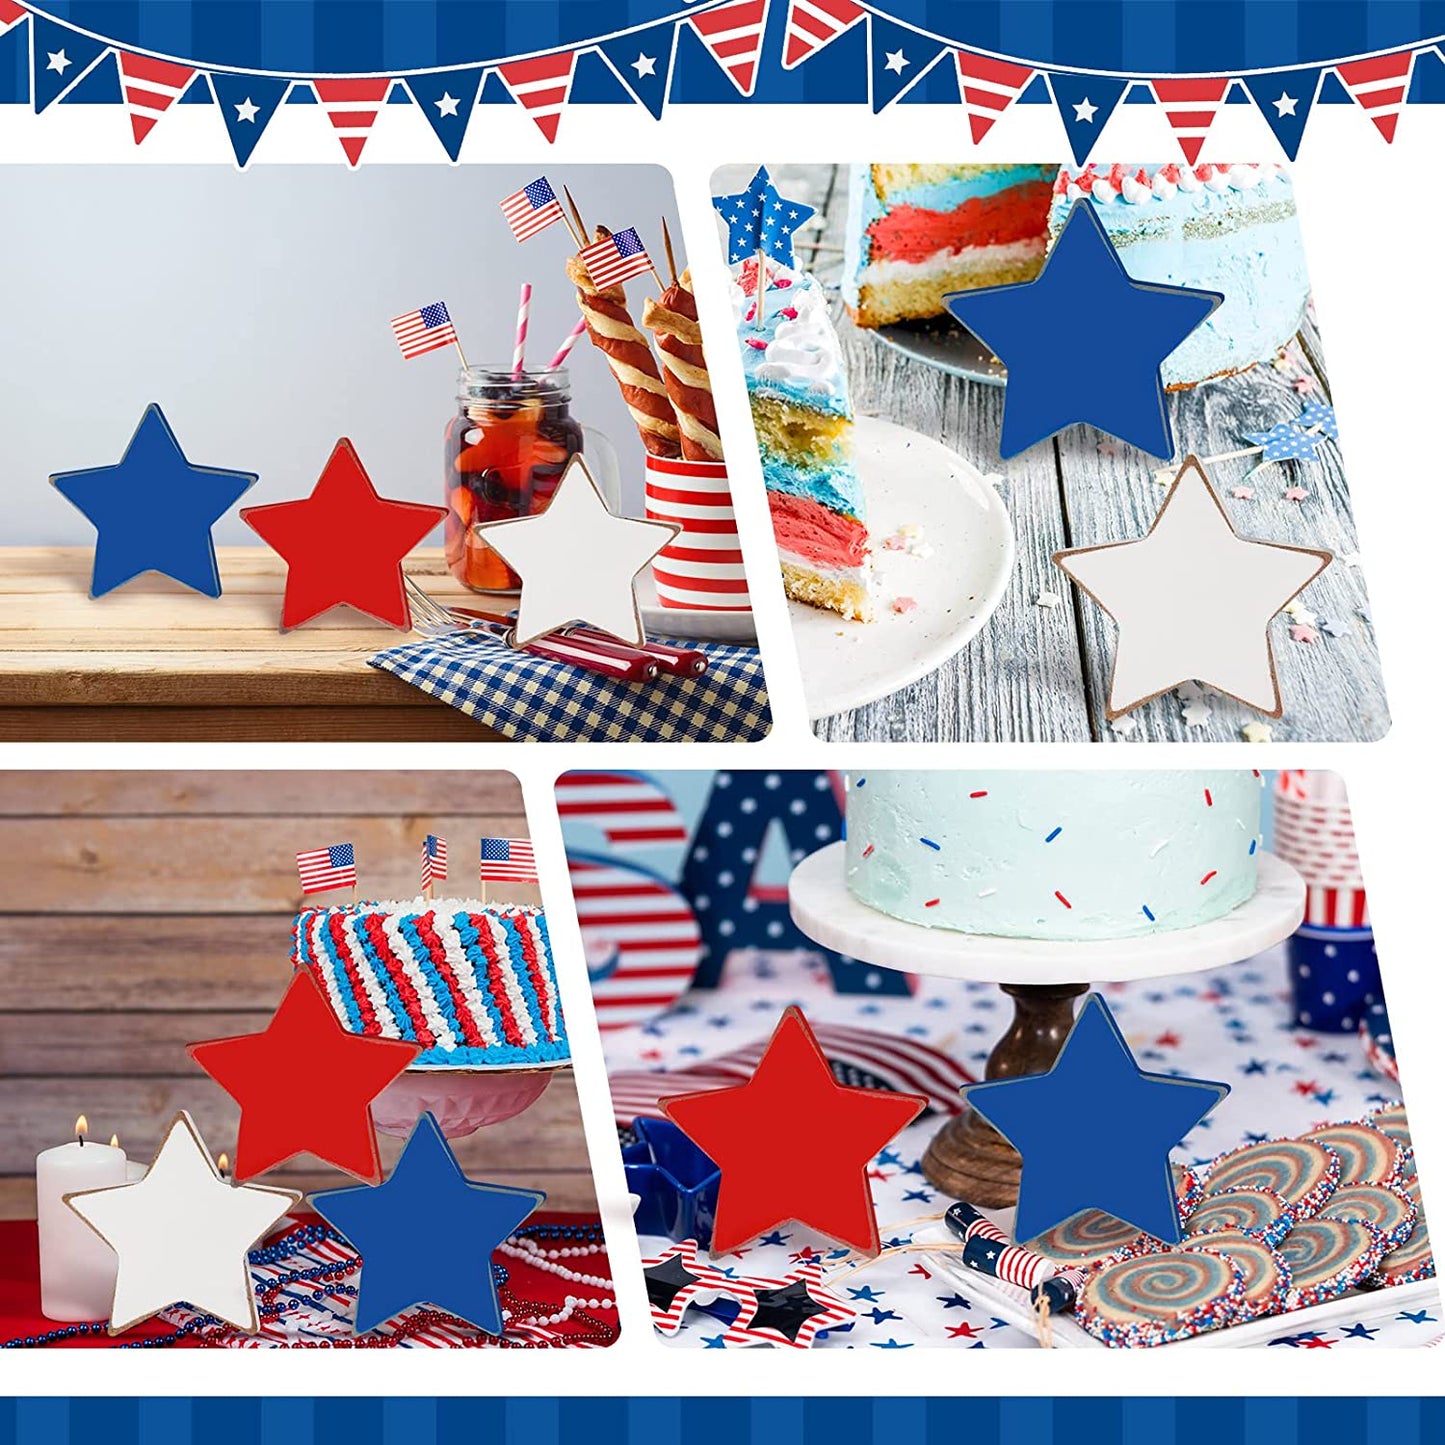 Patriotic Wooden Star 4th of July Wood Star Independence Day Home Table Decor Wood Star Standing Blocks for Home Tabletop Memorial Day Festival Celebration (Vintage)